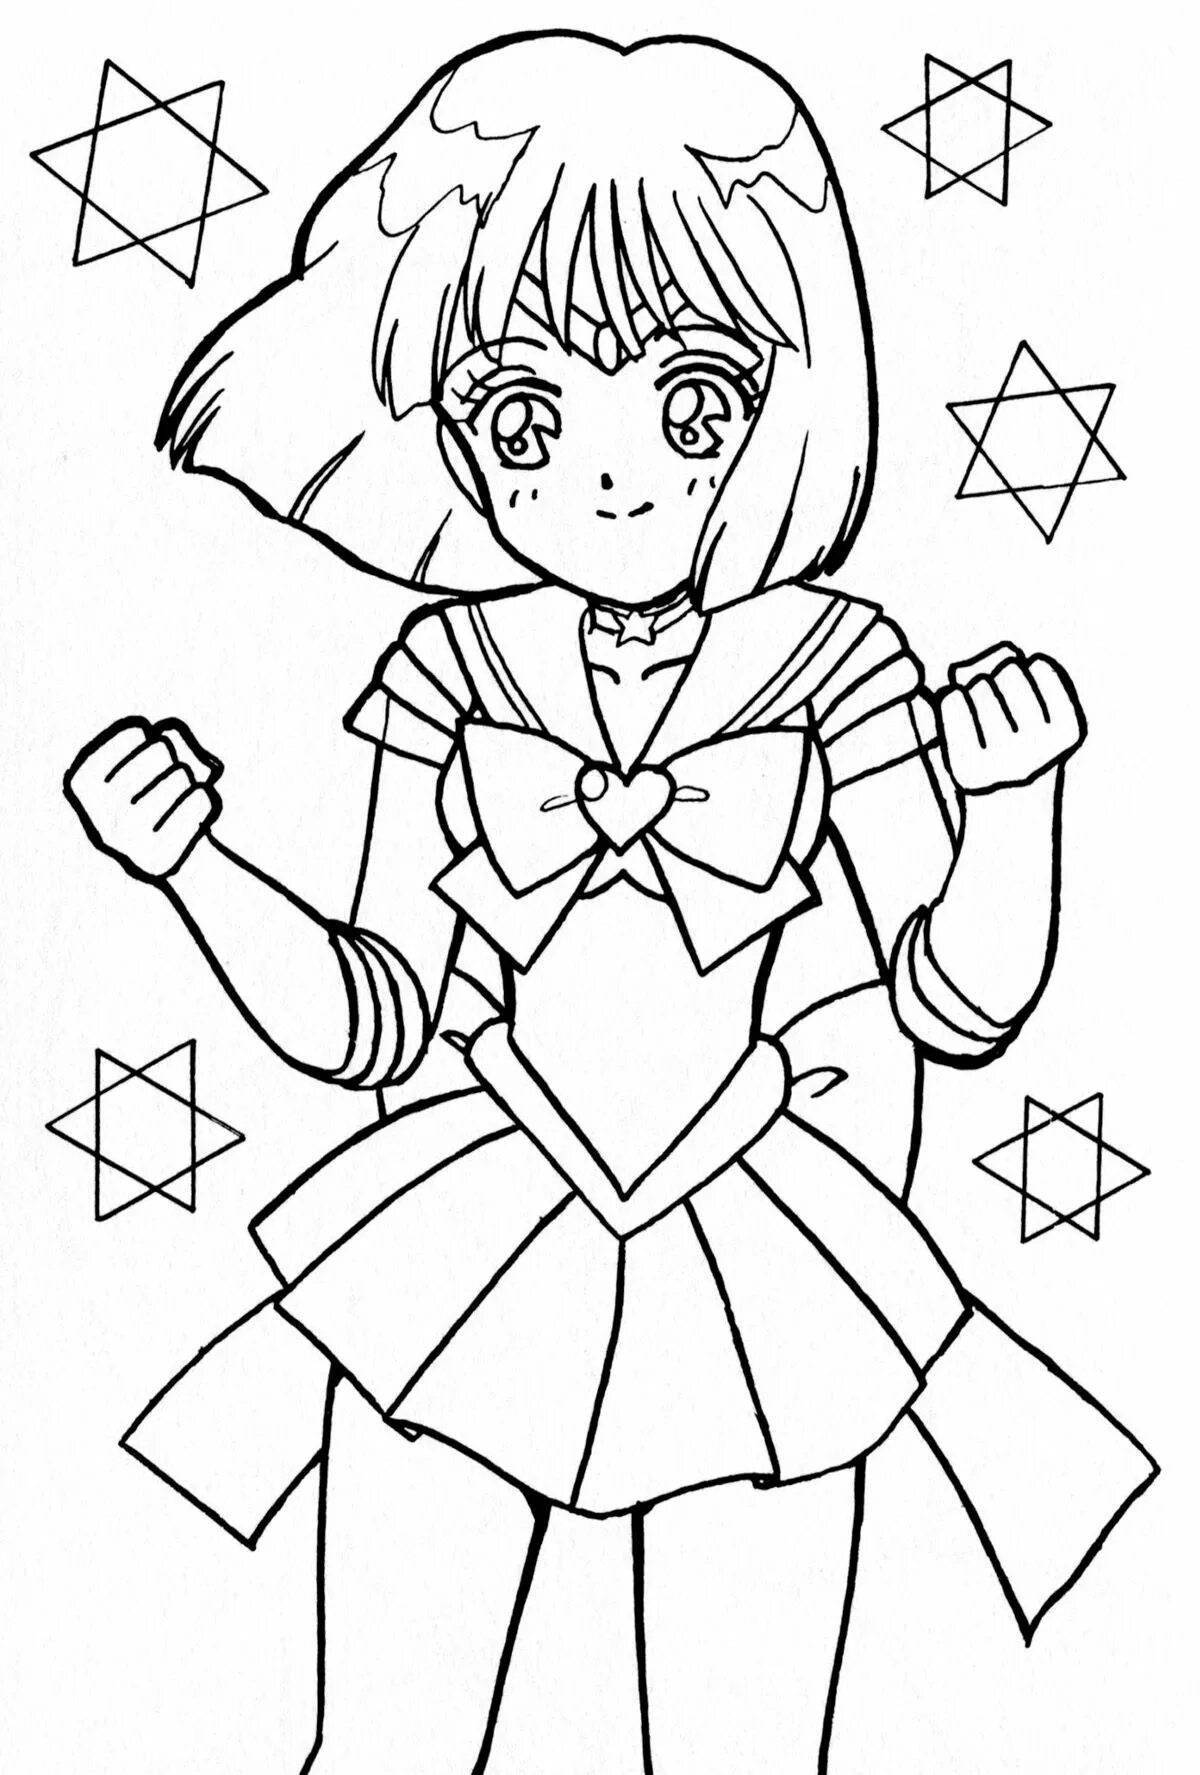 Sailor saturn deluxe coloring book